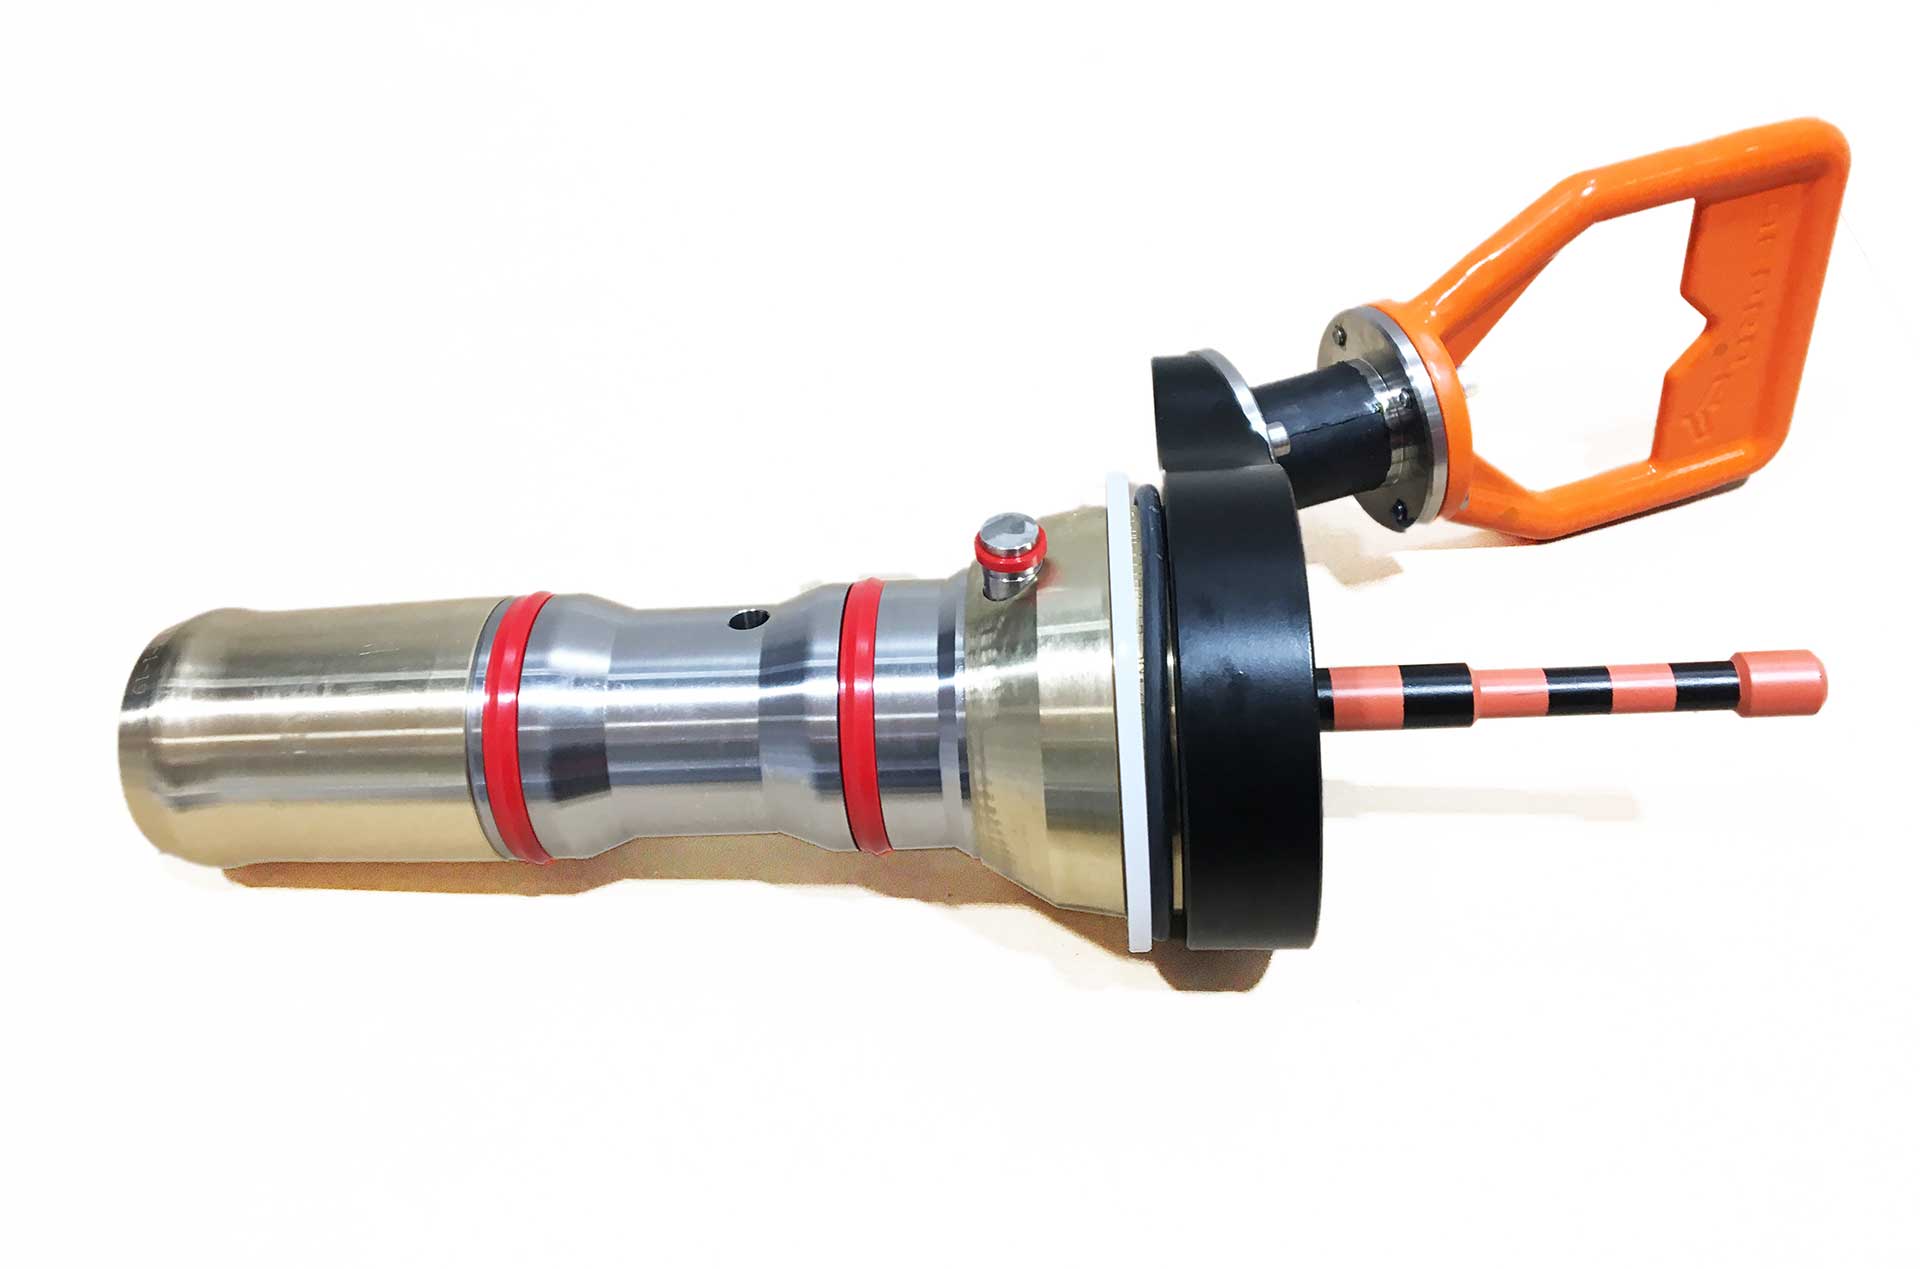 The large bore hot stab system is a fluid connection system for high-flow, low-pressure applications. The system is used for transferring subsea fluids, including hydraulic oil and corrosion inhibitors. White background.